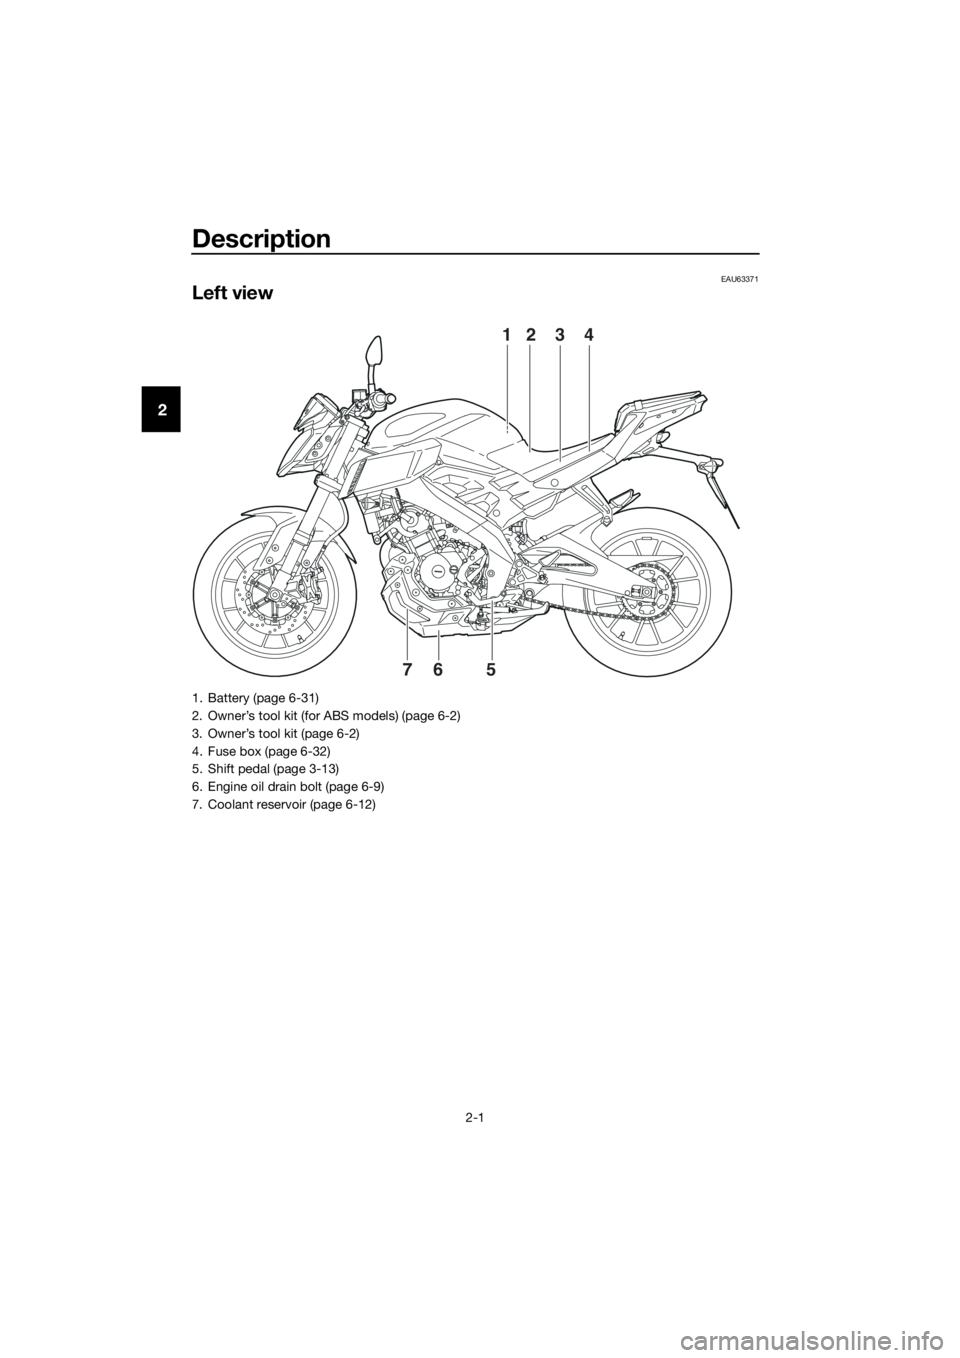 YAMAHA MT-125 2016  Owners Manual Description
2-1
2
EAU63371
Left view
2134
576
1. Battery (page 6-31)
2. Owner’s tool kit (for ABS models) (page 6-2)
3. Owner’s tool kit (page 6-2)
4. Fuse box (page 6-32)
5. Shift pedal (page 3-1